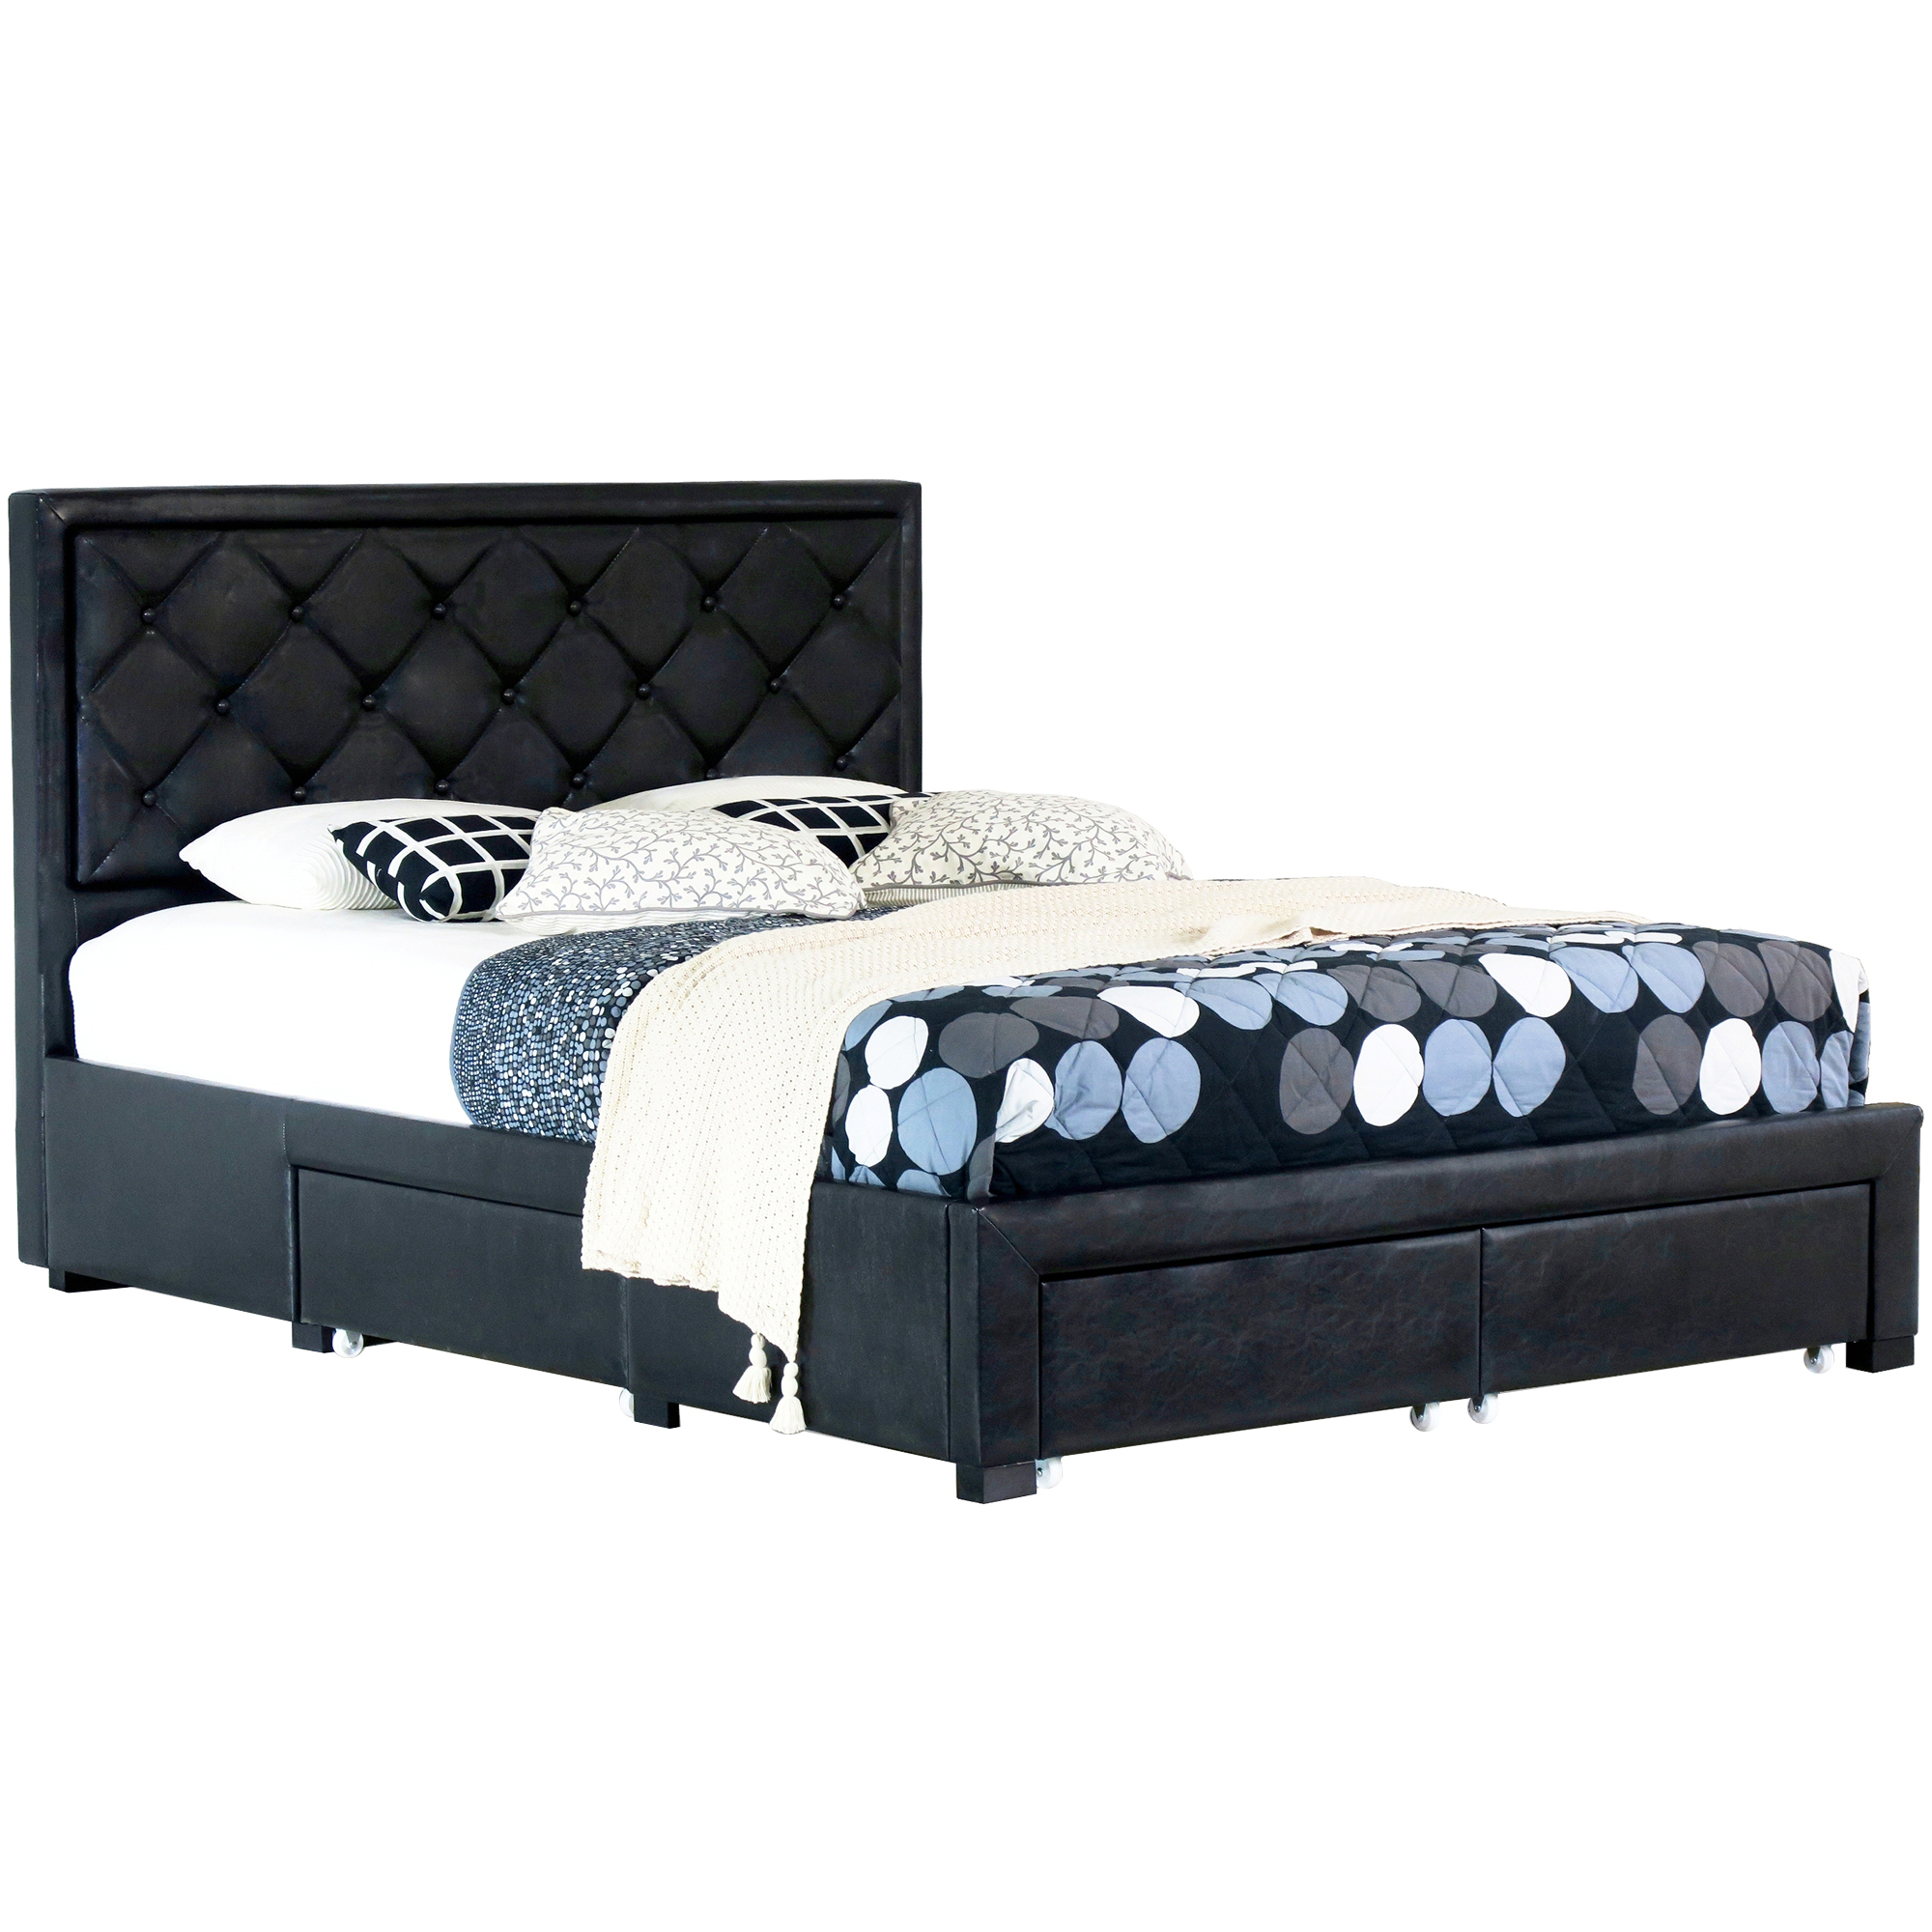 Faux Leather Bed Frame With Storage, Black Faux Leather Bed